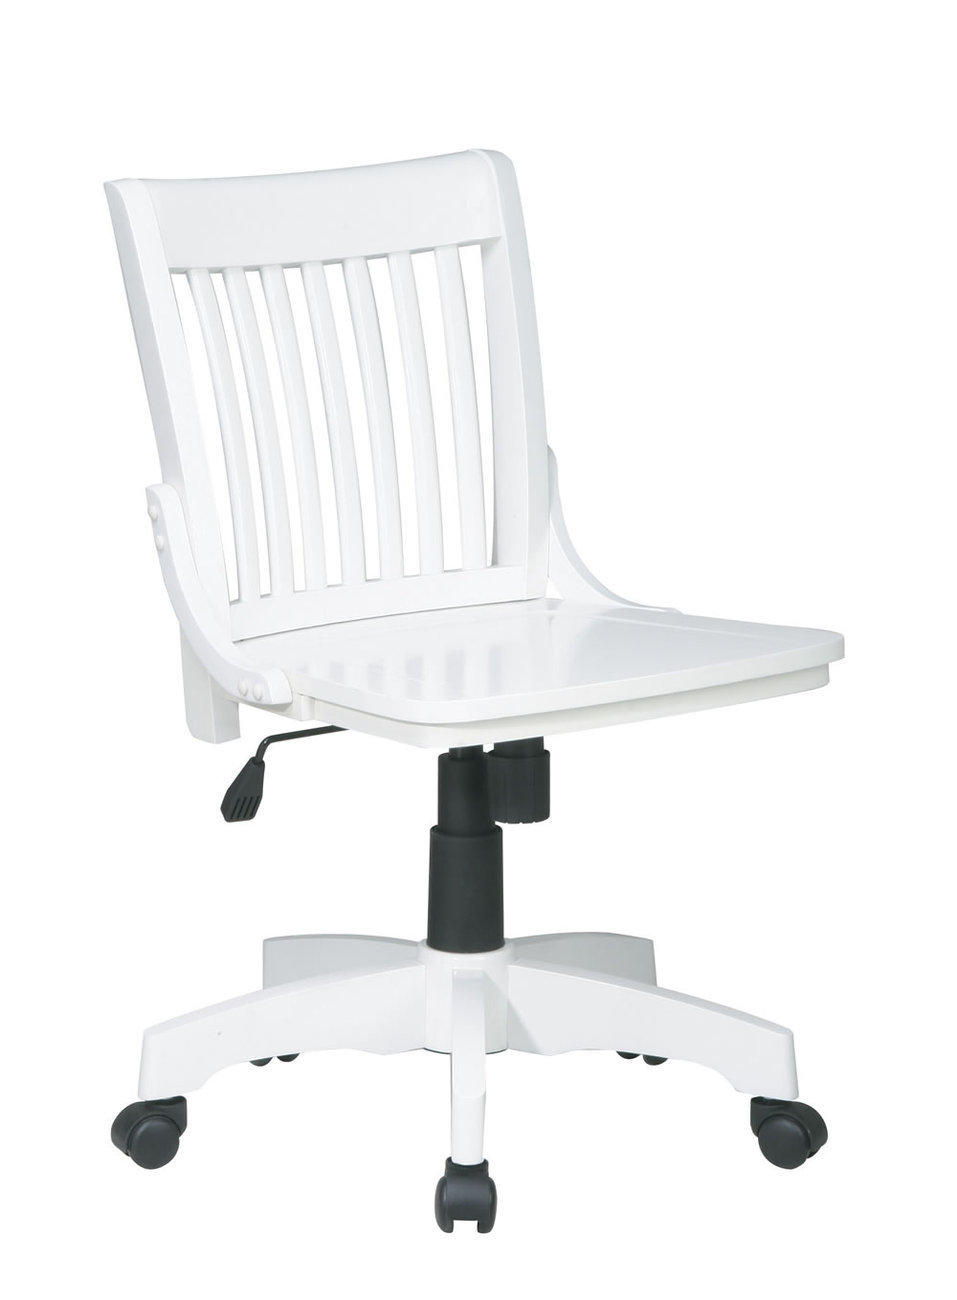 White Mission Style Wood Chair Armless And Similar Items